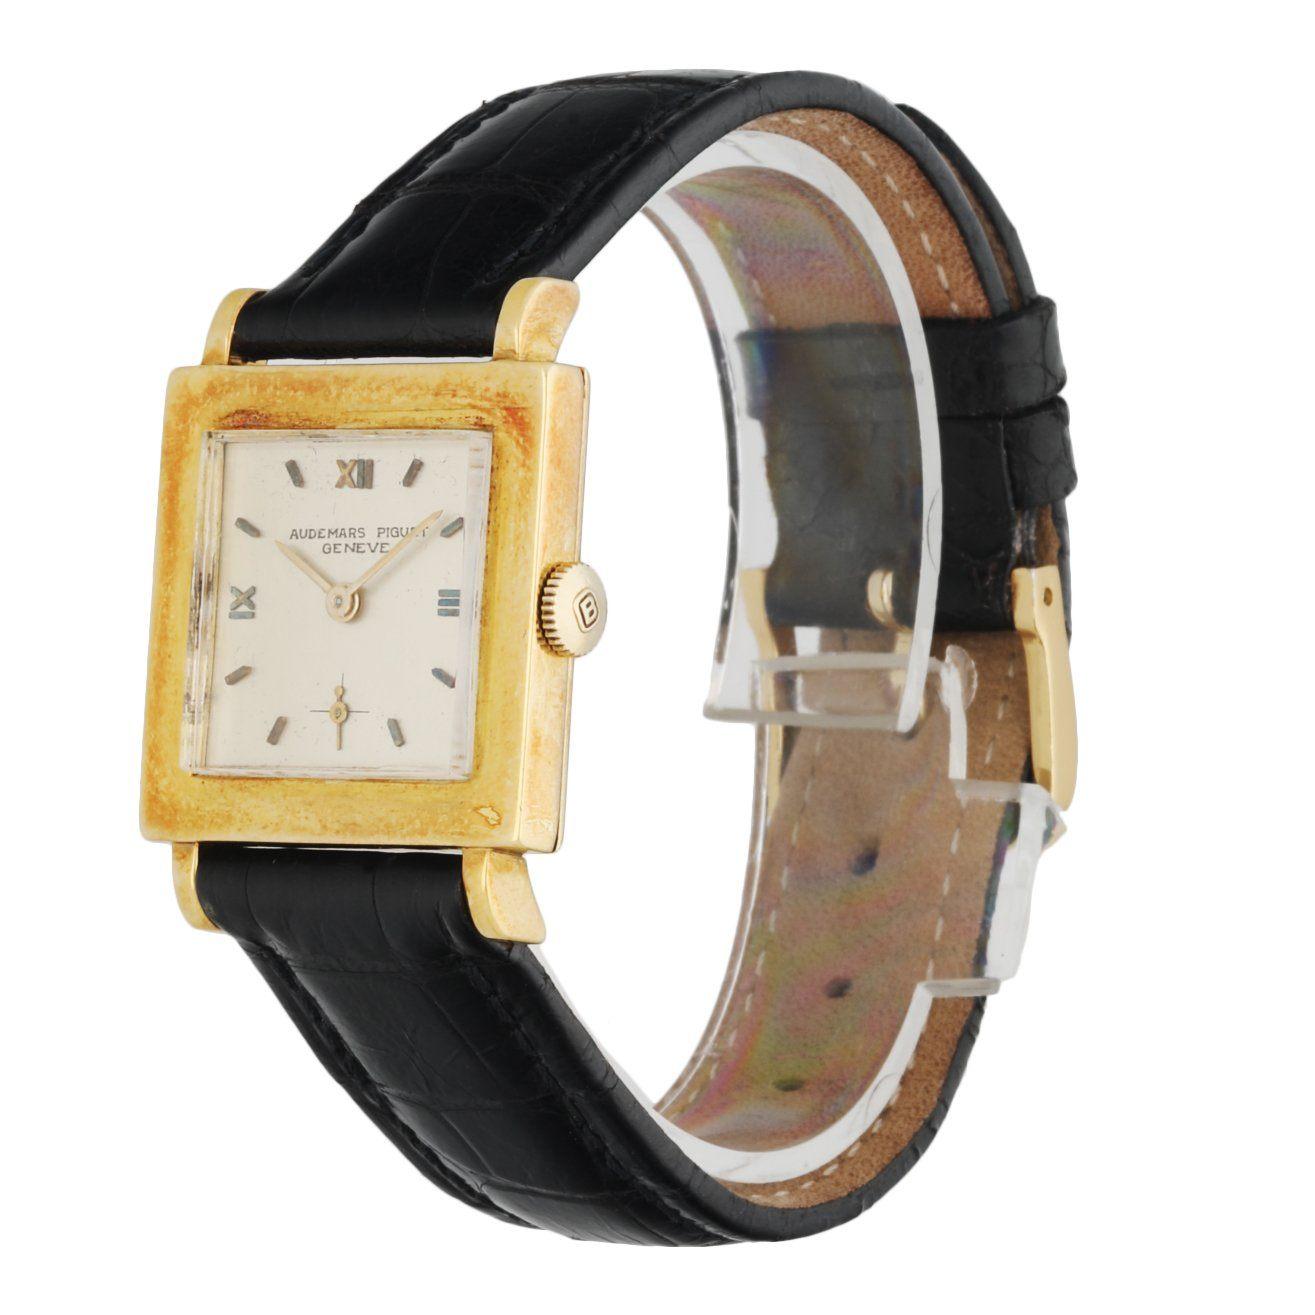 Audemars Piguet vintage ladies watch. 25MM 18K yellow gold case. Silver dial with gold hands and index & Roman numeral hour marker. Black leather strap with golden tone buckle. Will fit up to 7.5-Inch wrist. Sapphire crystal and 18K yellow gold case